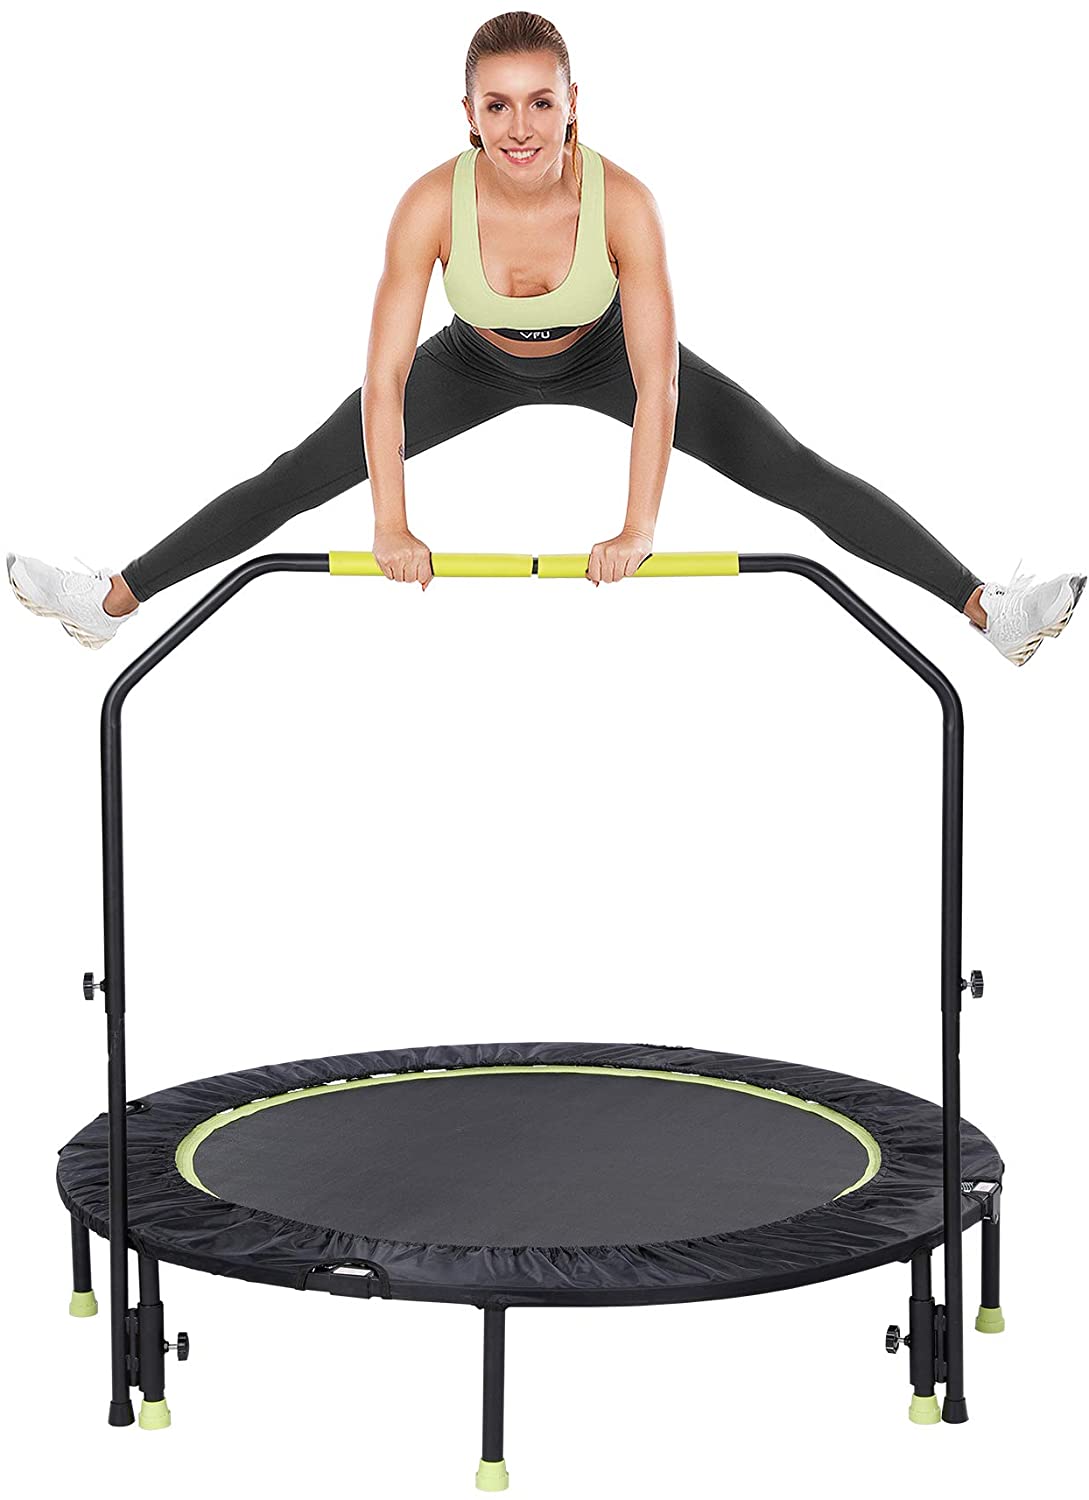 Max Load 155 LBS Safe Exercise Trampoline to Burn off Energy Pelpo 36/38 Mini Trampoline for Kids with Foam Handle Small Indoor Trampoline for Toddlers Age 2-8 Toddler Trampoline with Silent Resistance Band 